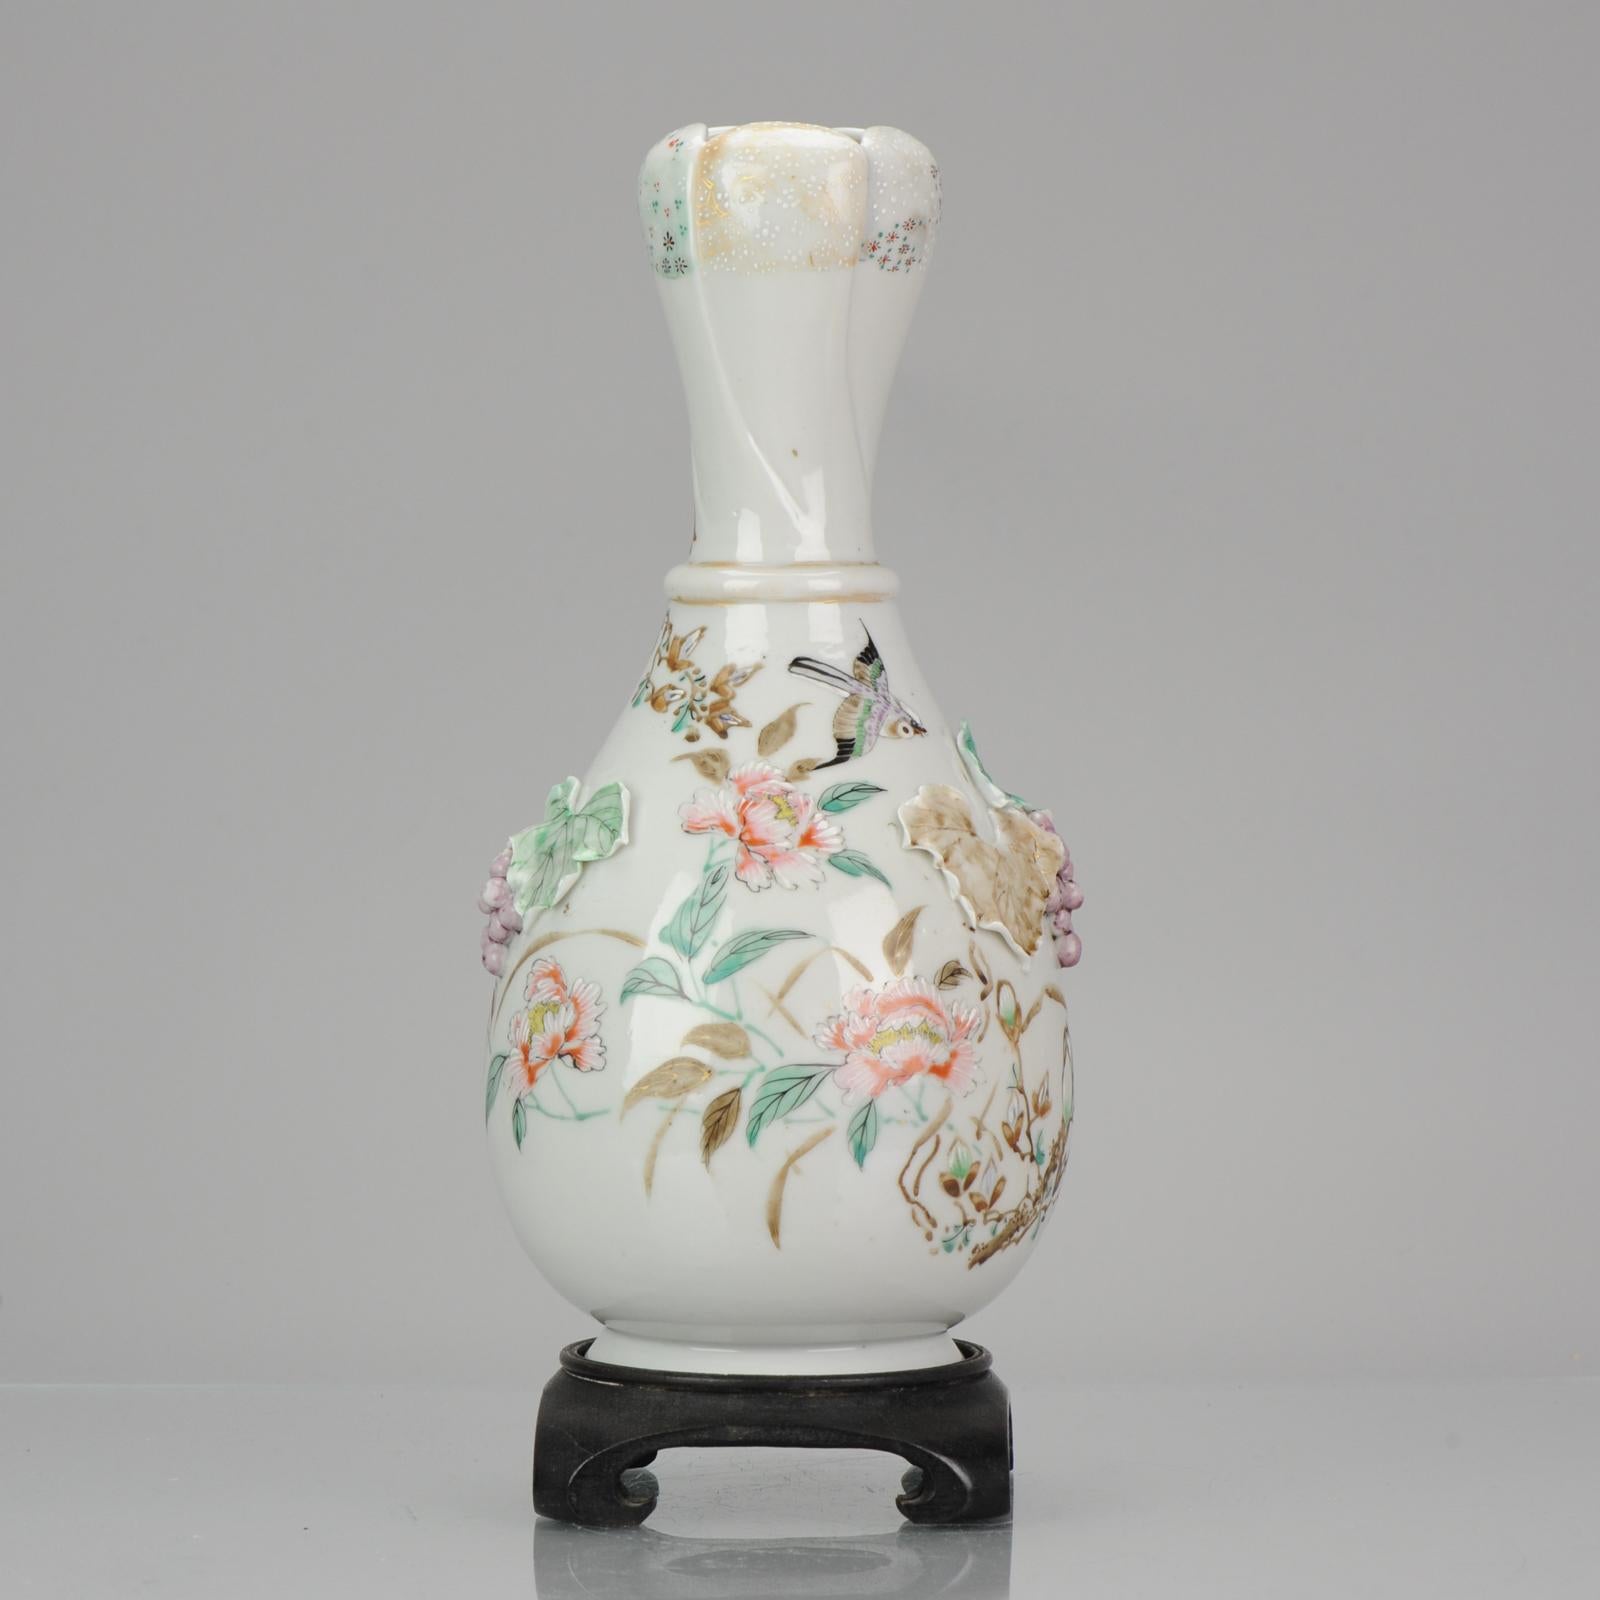 A Japanese porcelain vase, unusual in shape and with beautiful relief application of grapes and leaves. Painted scene all over of flowers and a bird in flight.
Swirled top in the shape of a flower.
Stand is included.

Condition
/ Overall